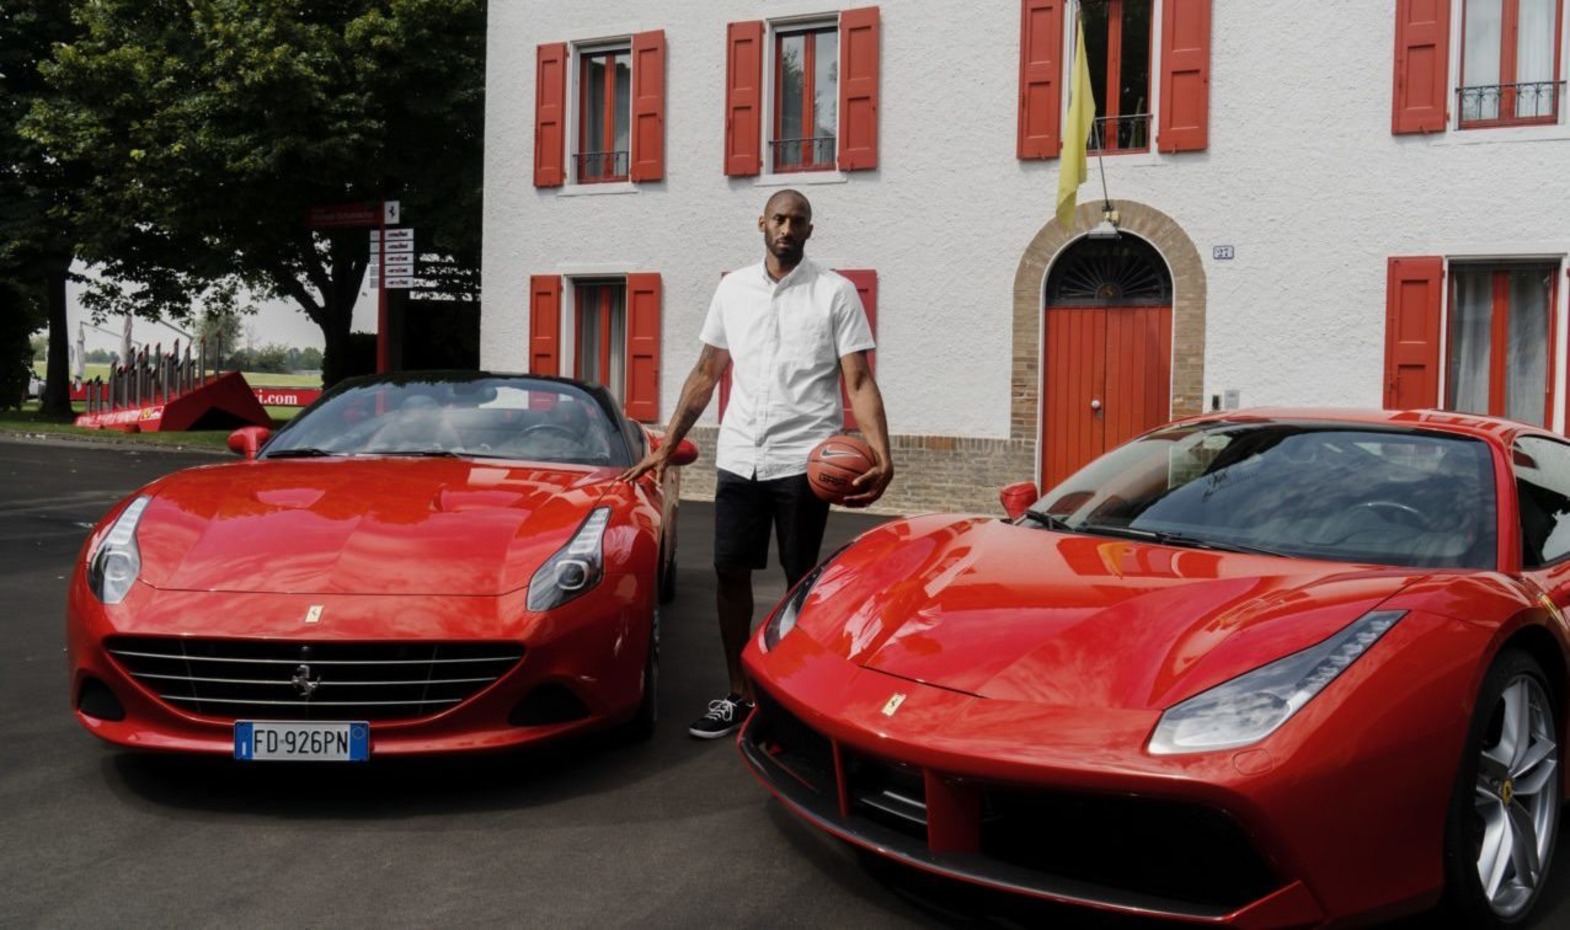 bao to demonstrate his respect for his idol lebron james surprised the world by gifting a ferrari f supercar to michael jordan on his th birthday 65411e5d6cf25 To Demonstrate His Respect For His Idol, Lebron James Surprised The World By Gifting A Ferrari F430 Supercar To Michael Jordan On His 60th Birthday.